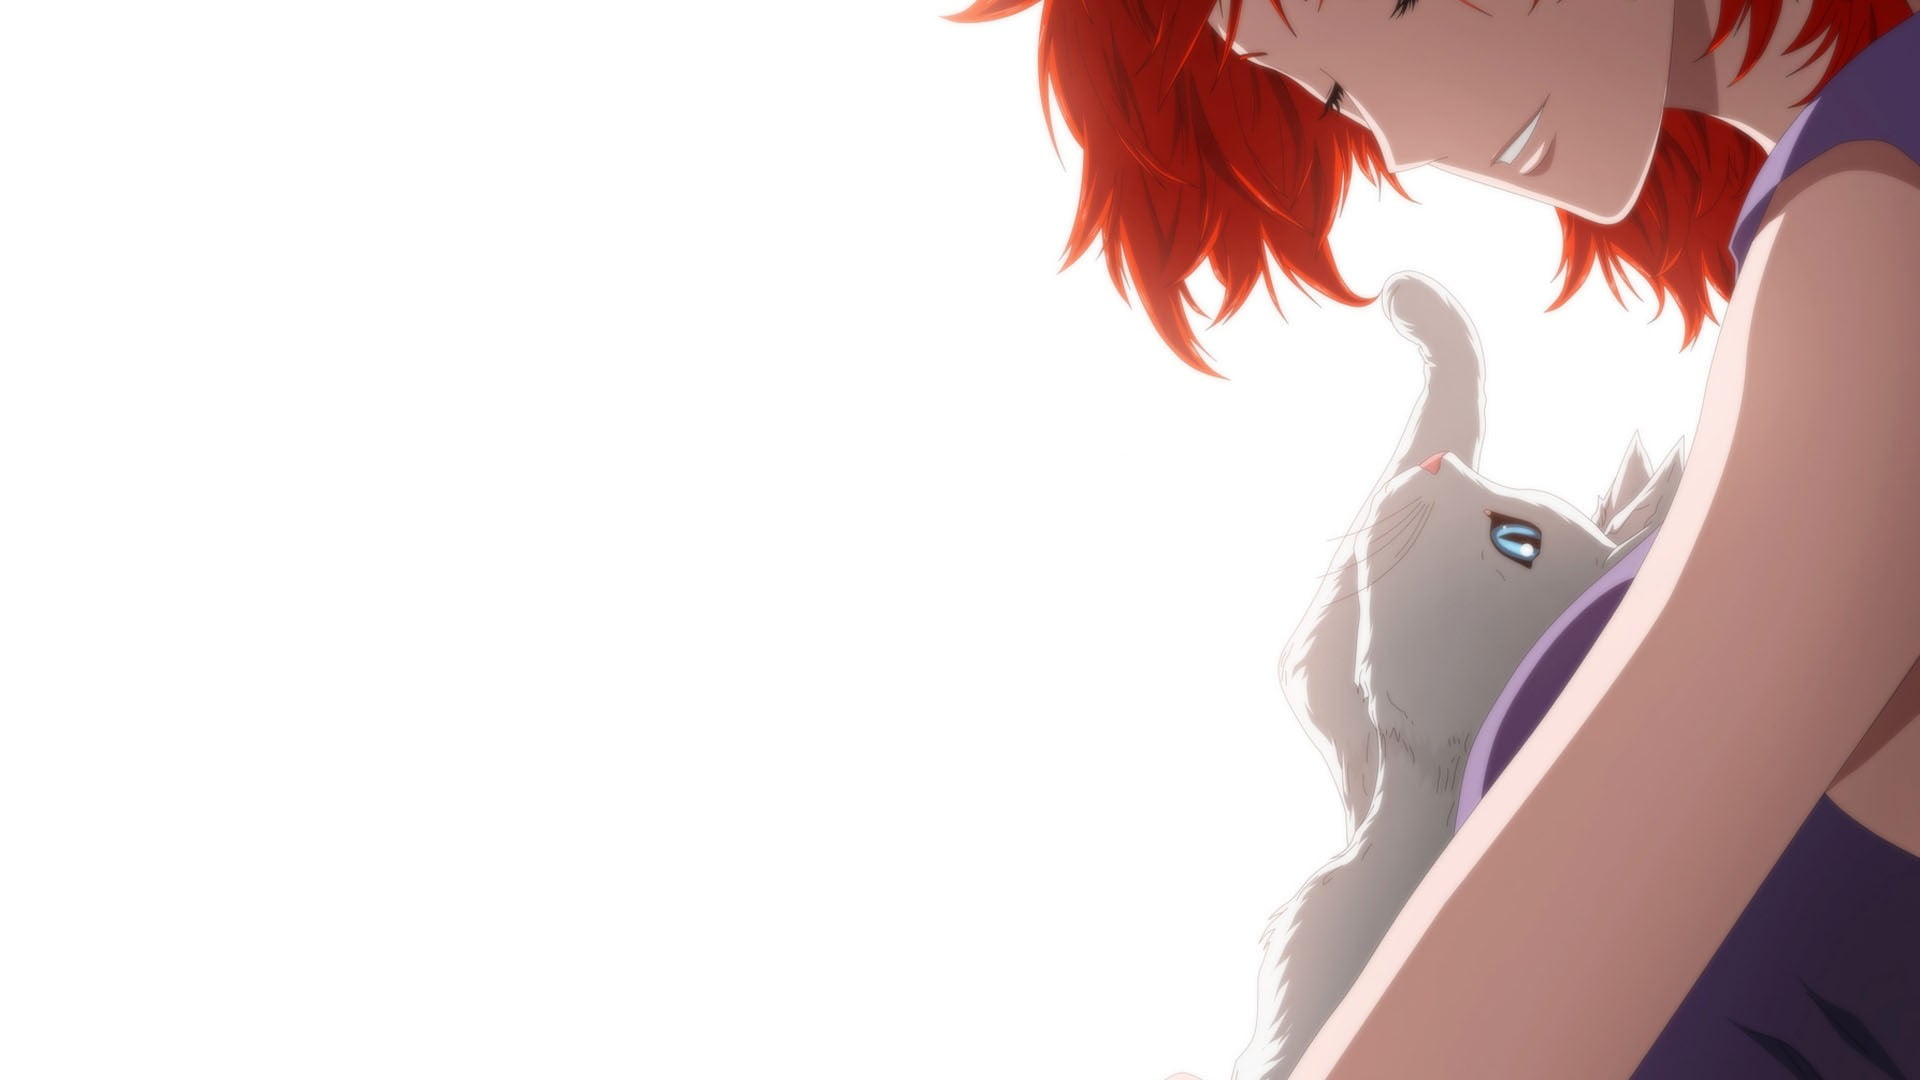 red haired female anime character holding gray cat